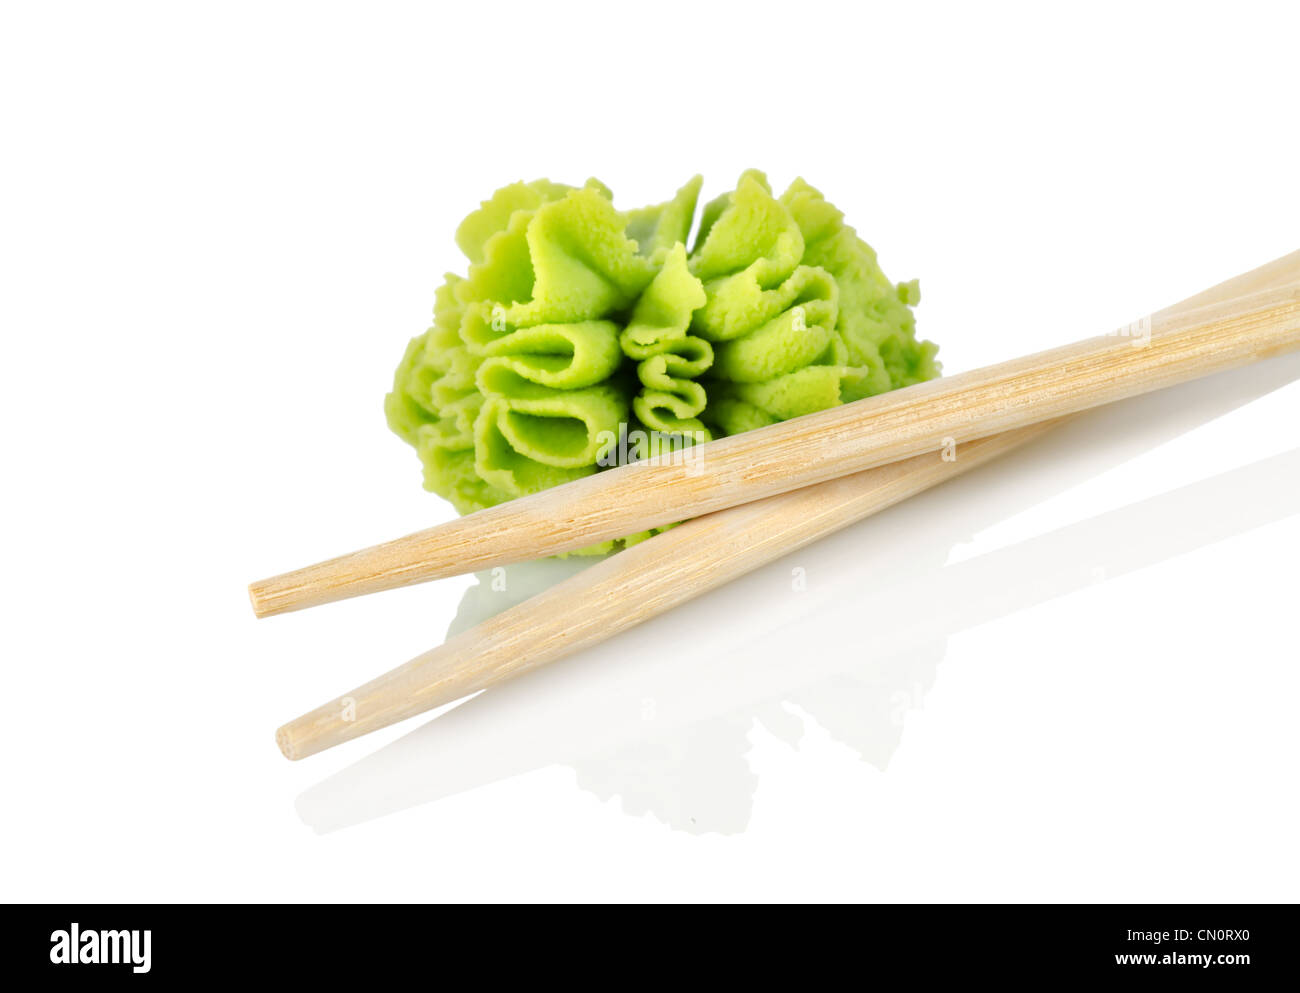 Wooden chopsticks and wasabi isolated on a white background Stock Photo